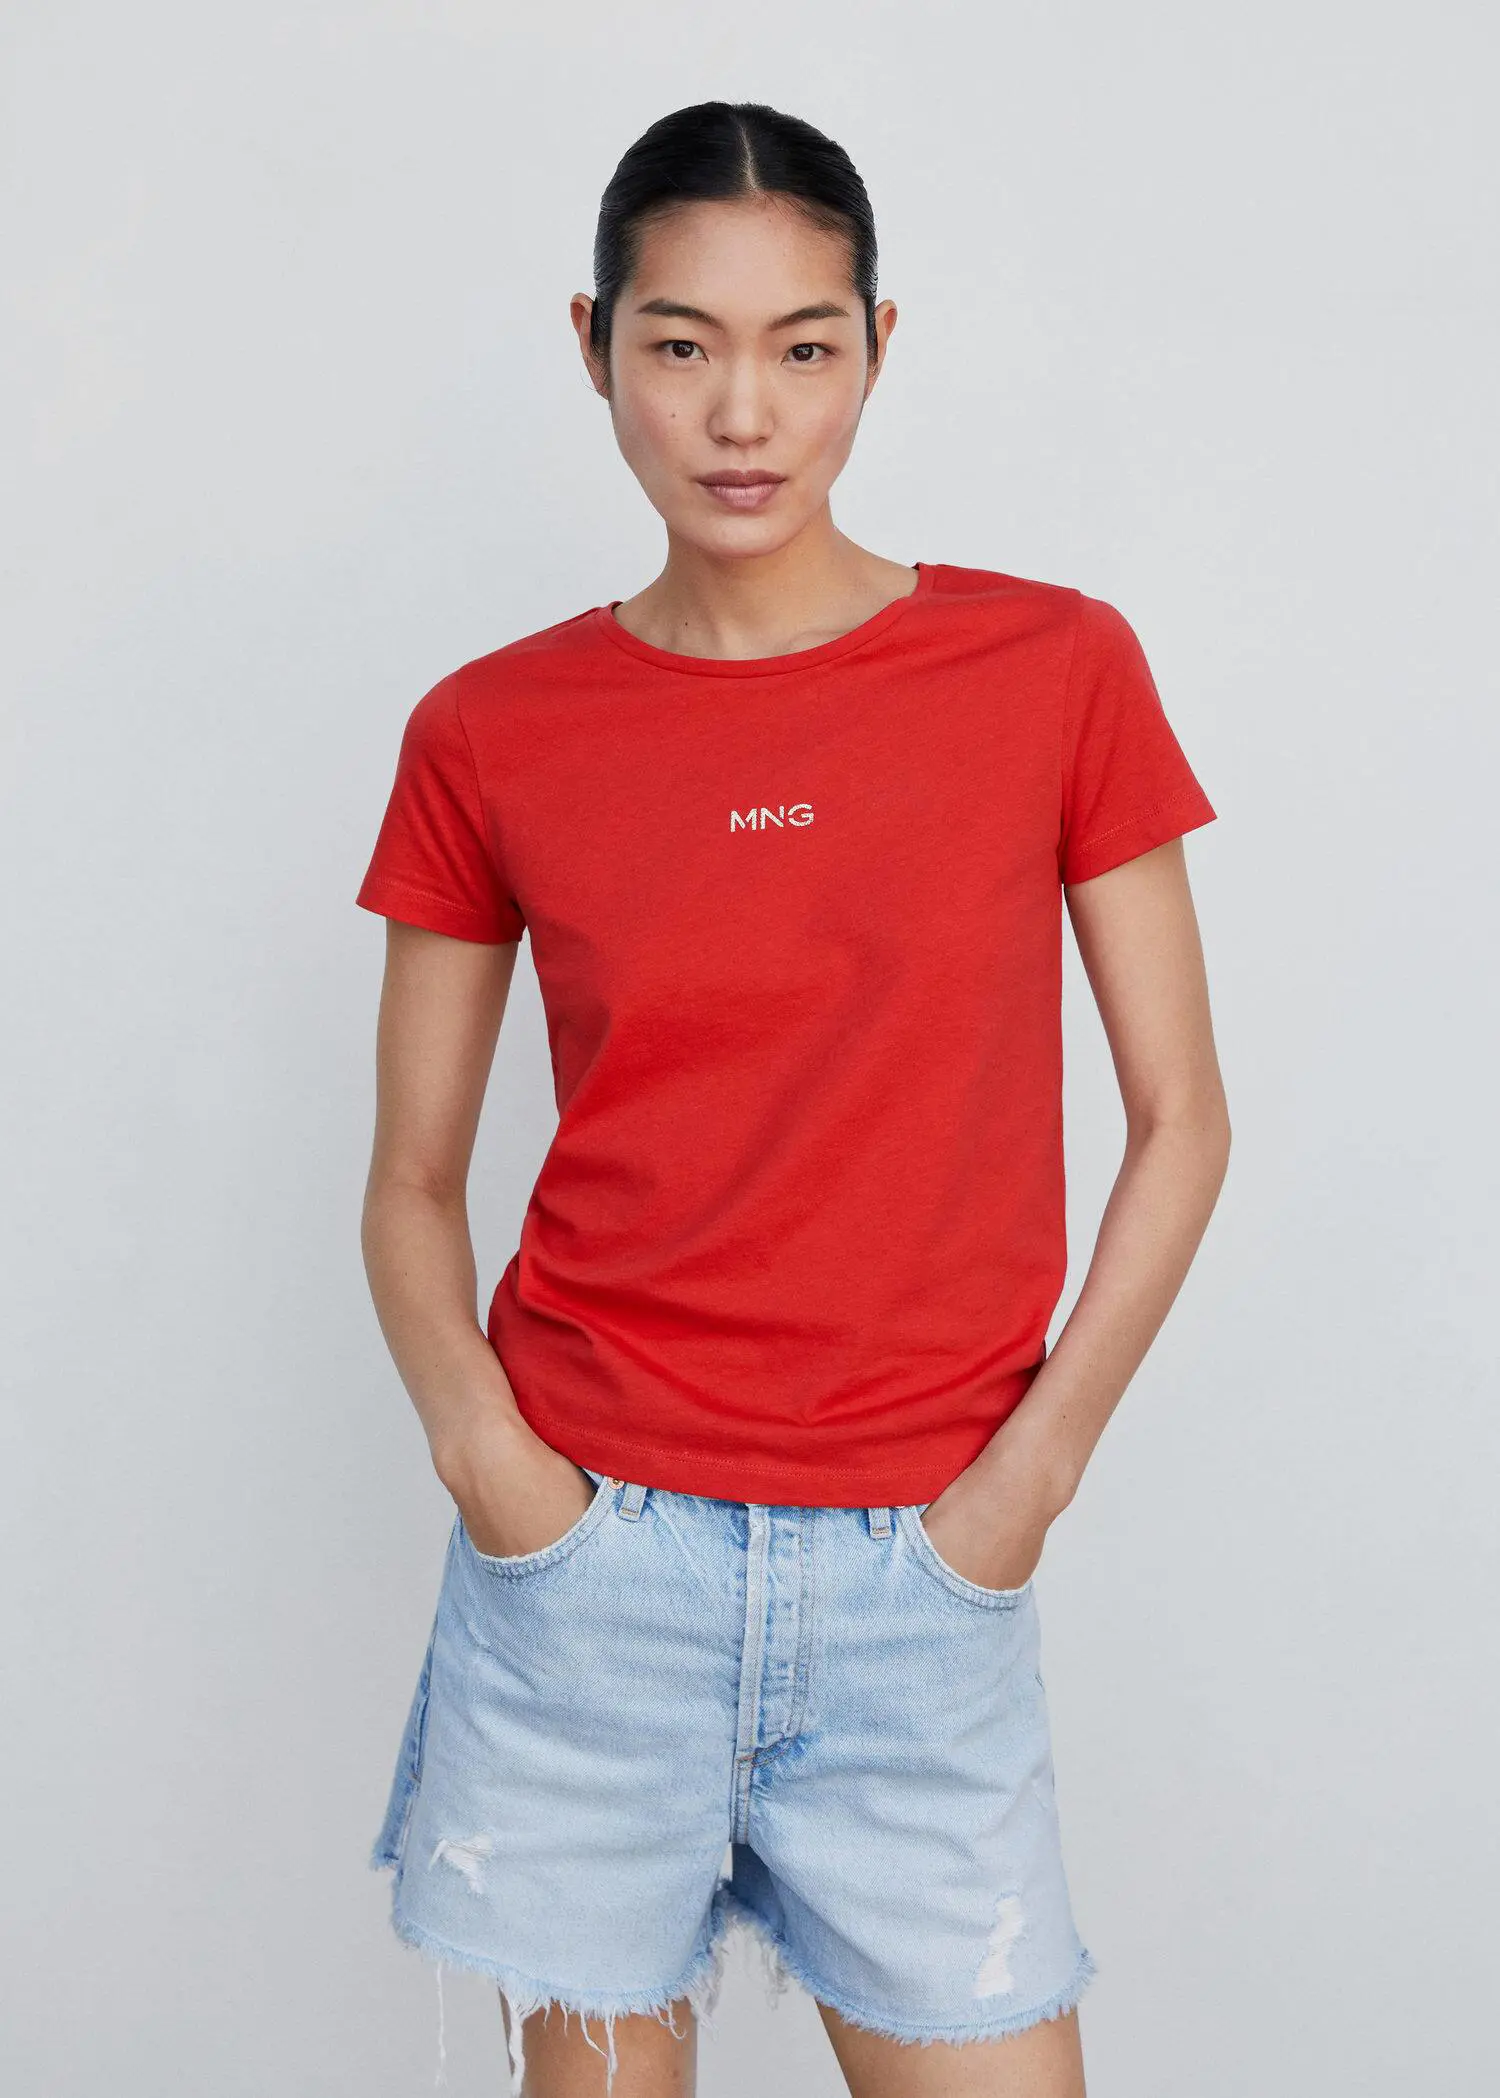 Mango Metallic logo T-shirt. a person wearing a red shirt and jeans. 